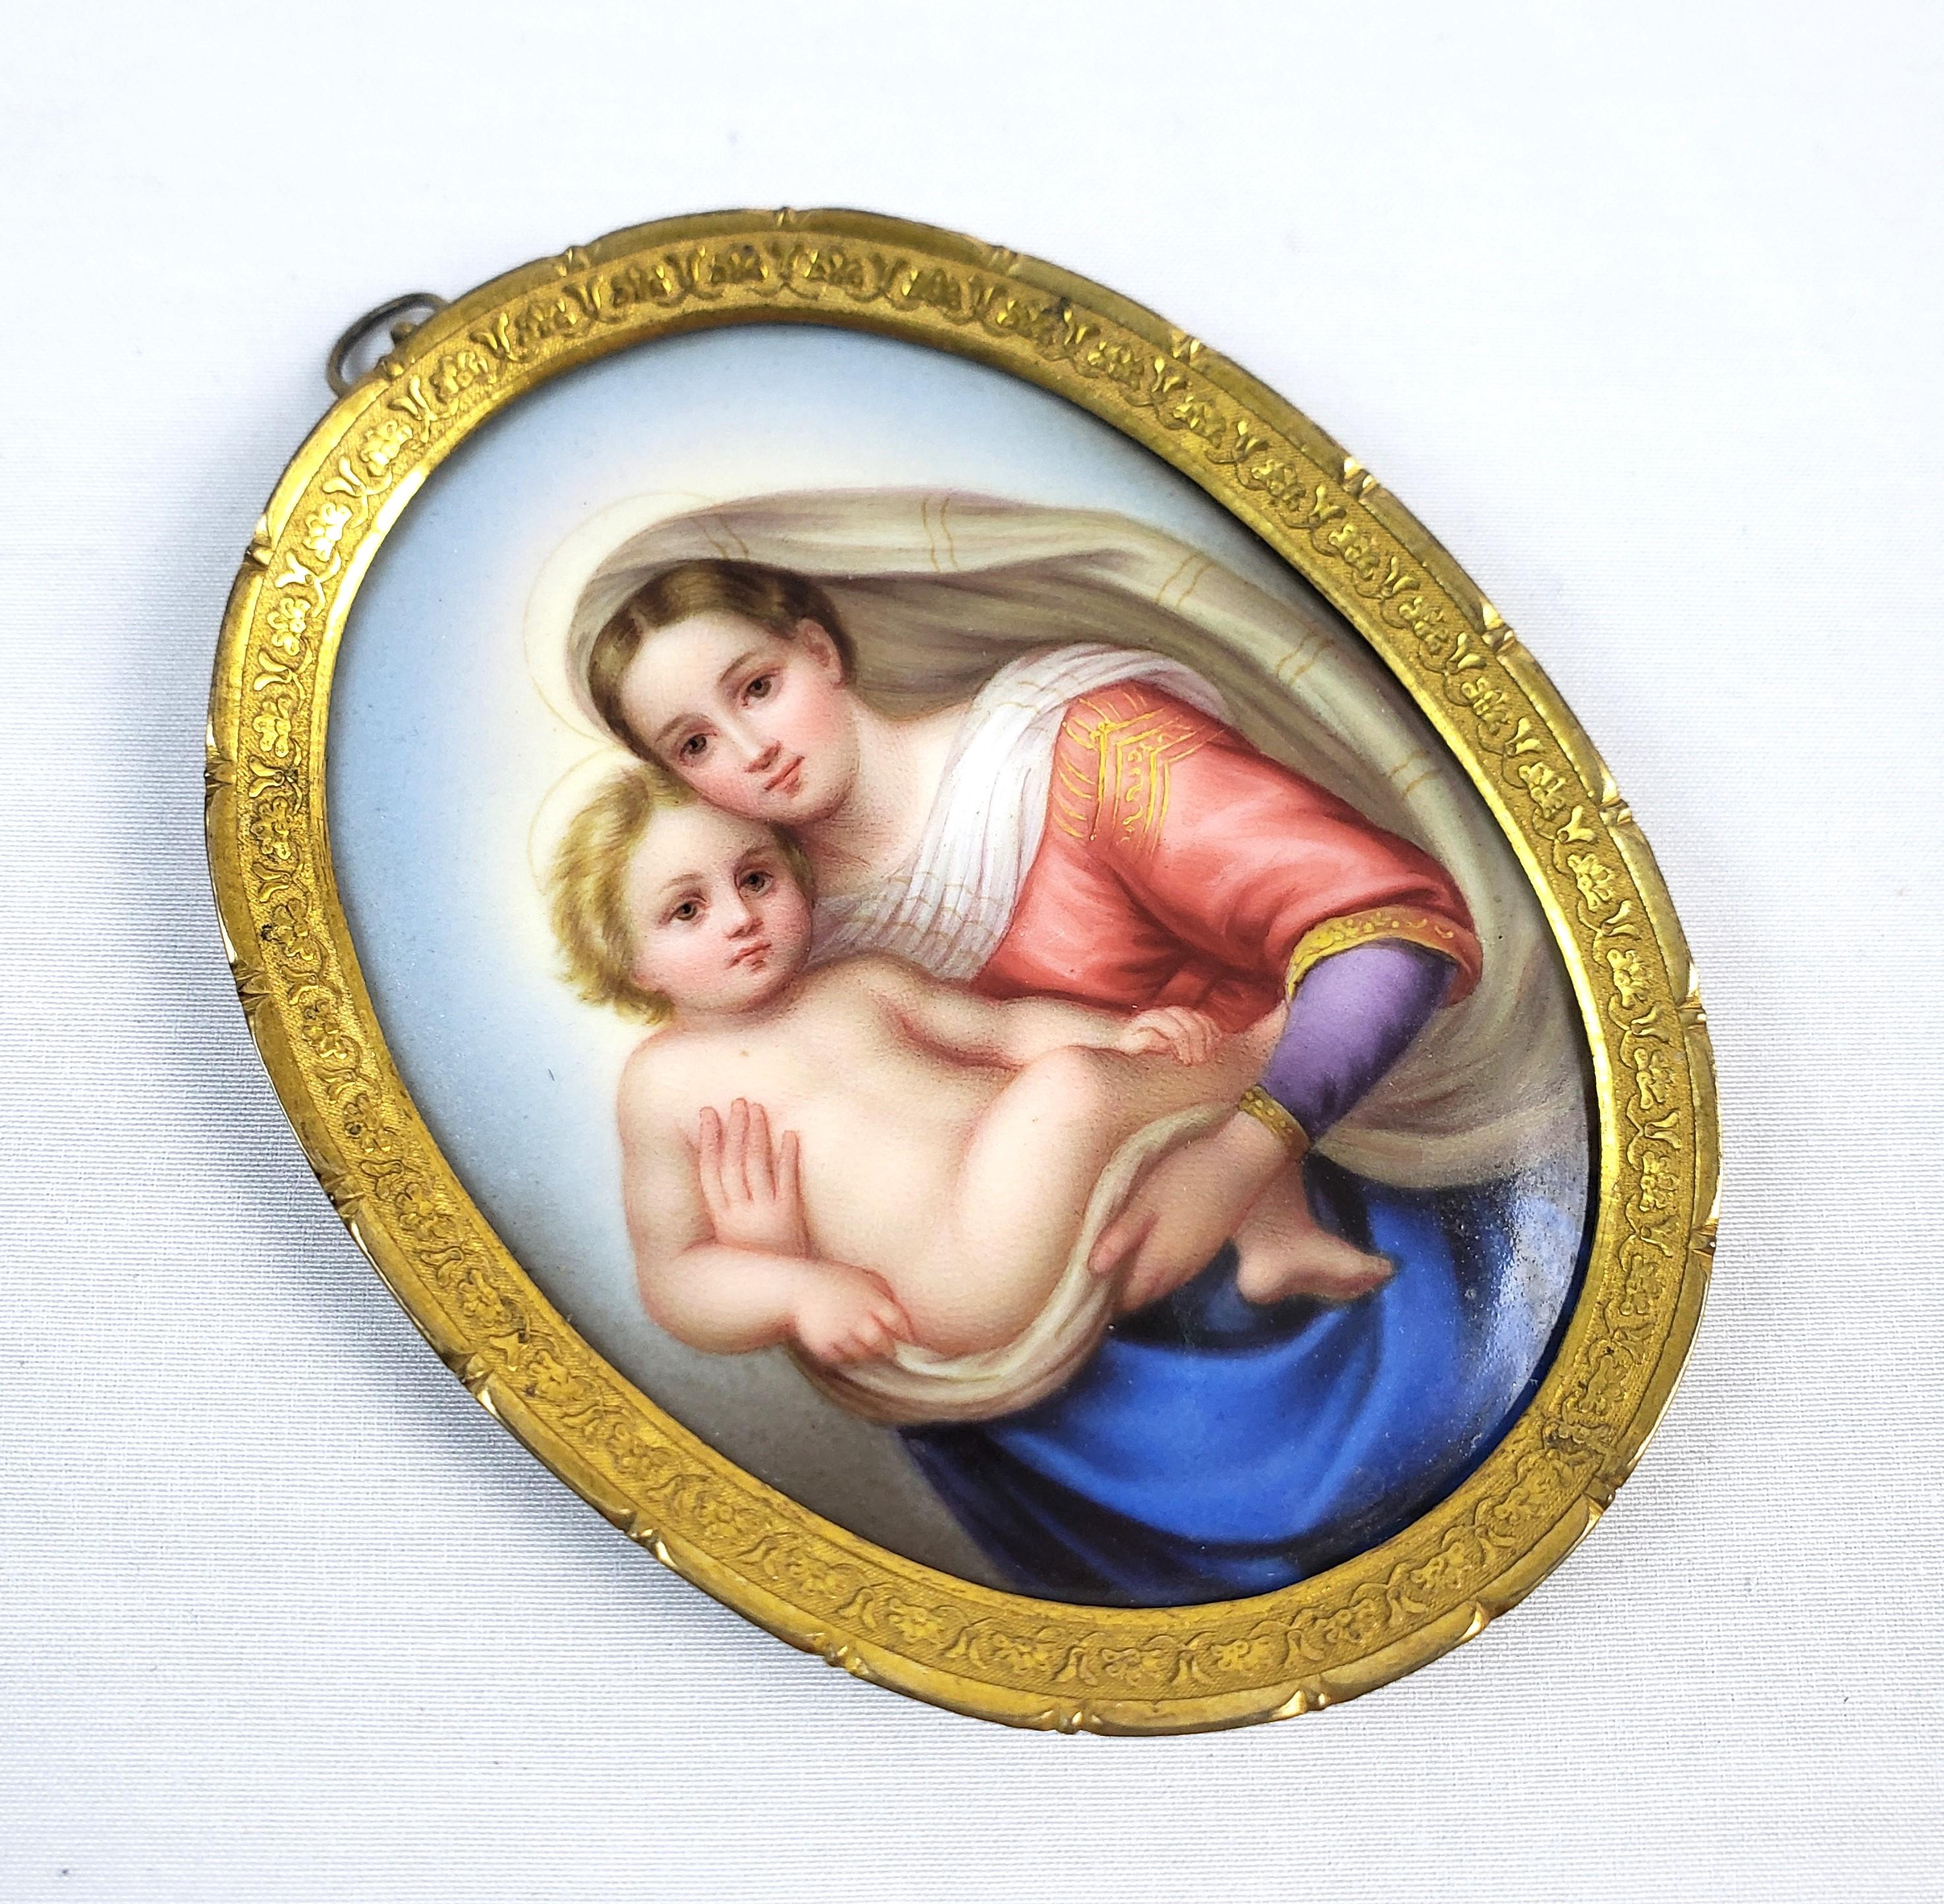 This finely executed portrait is unsigned and presumed to have originated from Italy and date to approximately 1900 and done in a Renaissance style. The portrait is hand-painted on a porcealin medallion and depicts the iconic image of the Madonna